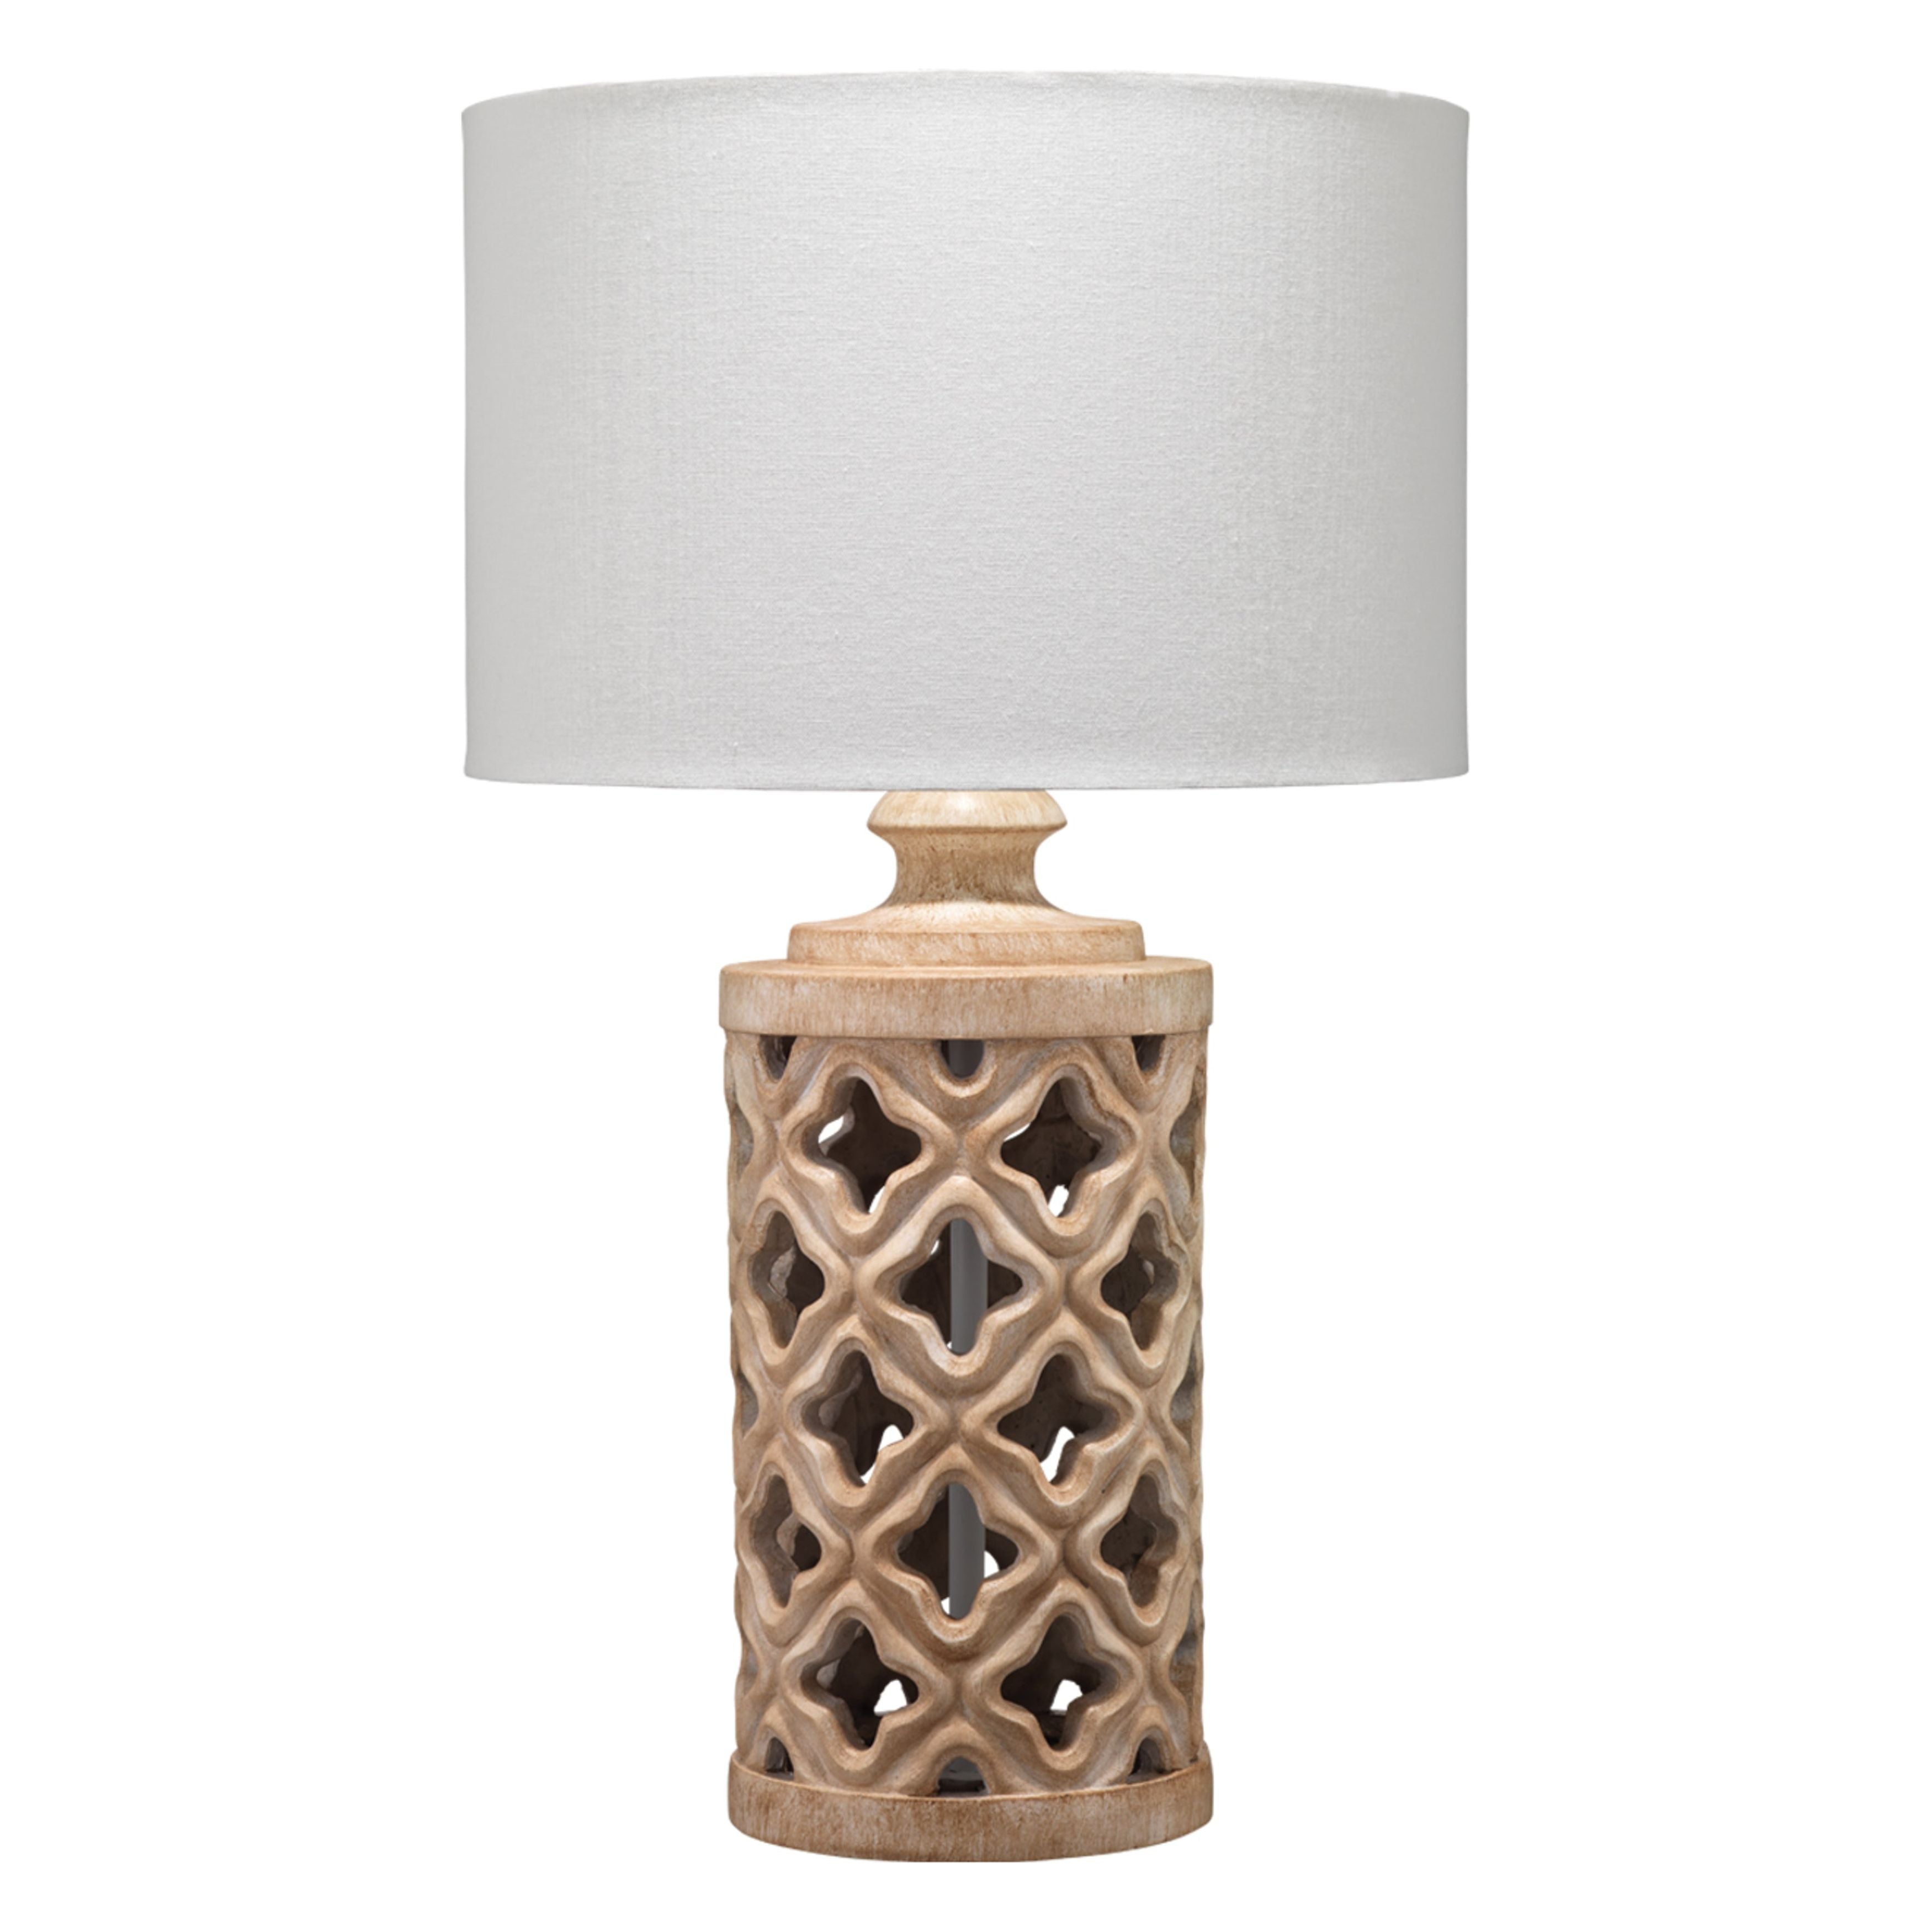 Jamie Young Company - BL616-TL24 - Starlet Table Lamp - Starlet - White Wash